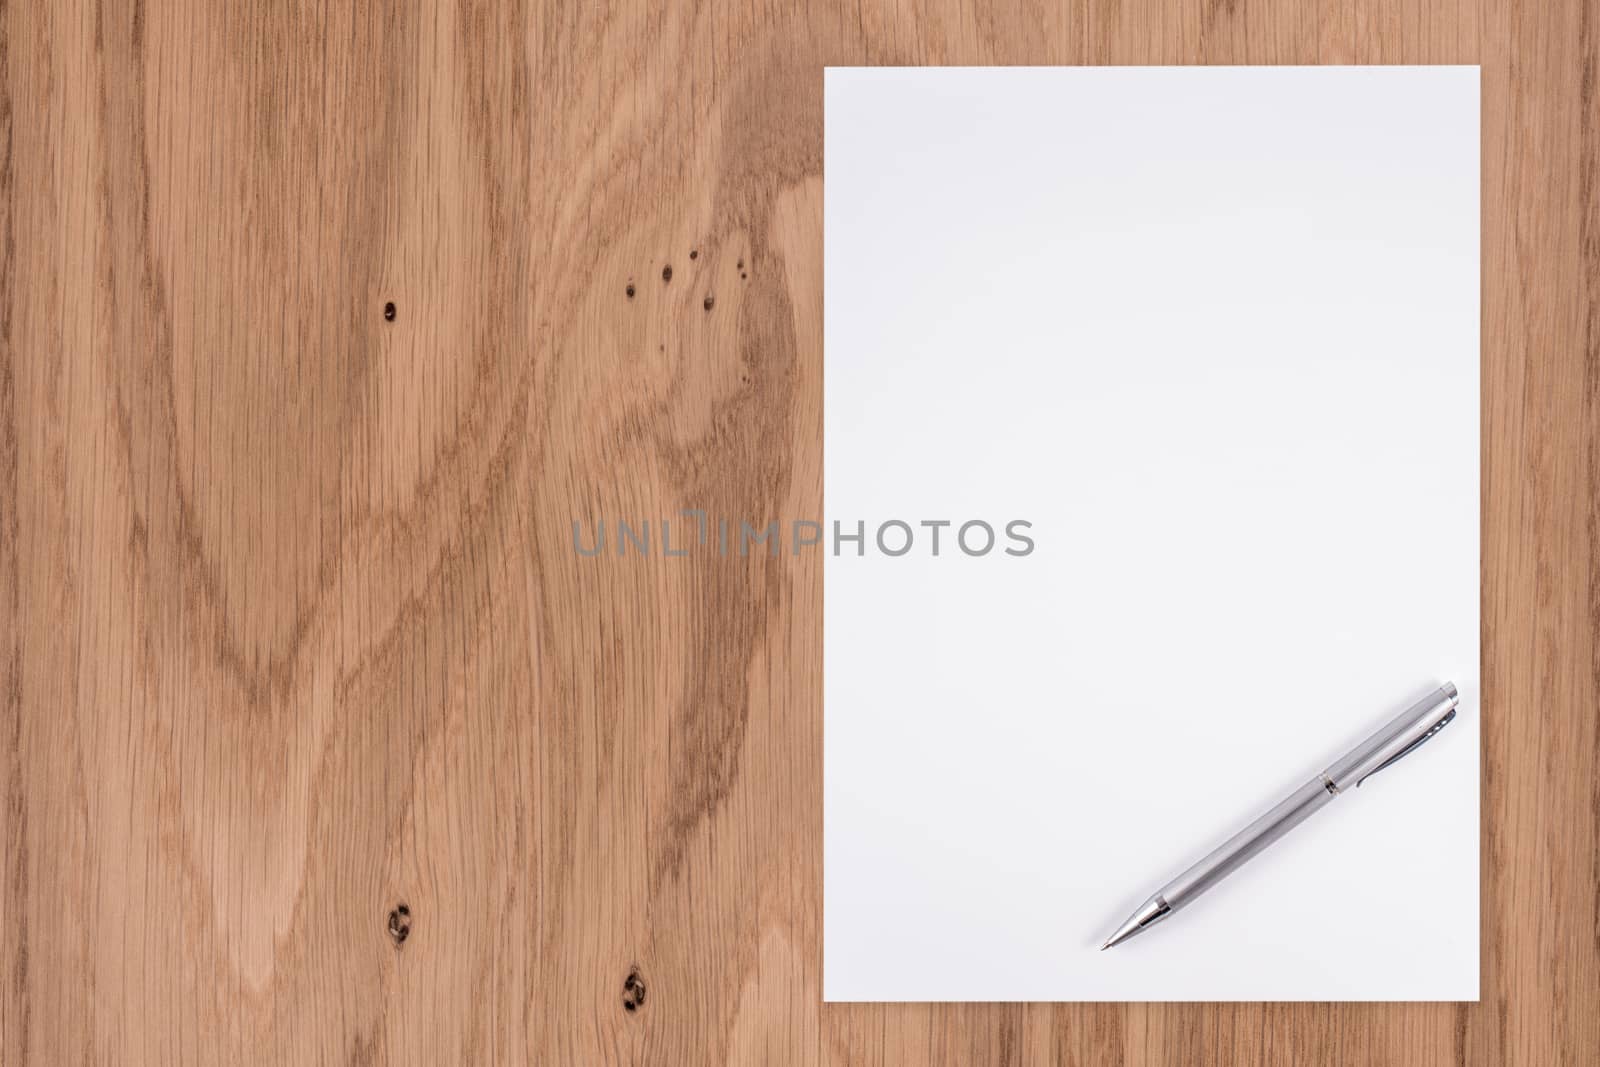 Blank white paper with pen on a wooden desk.